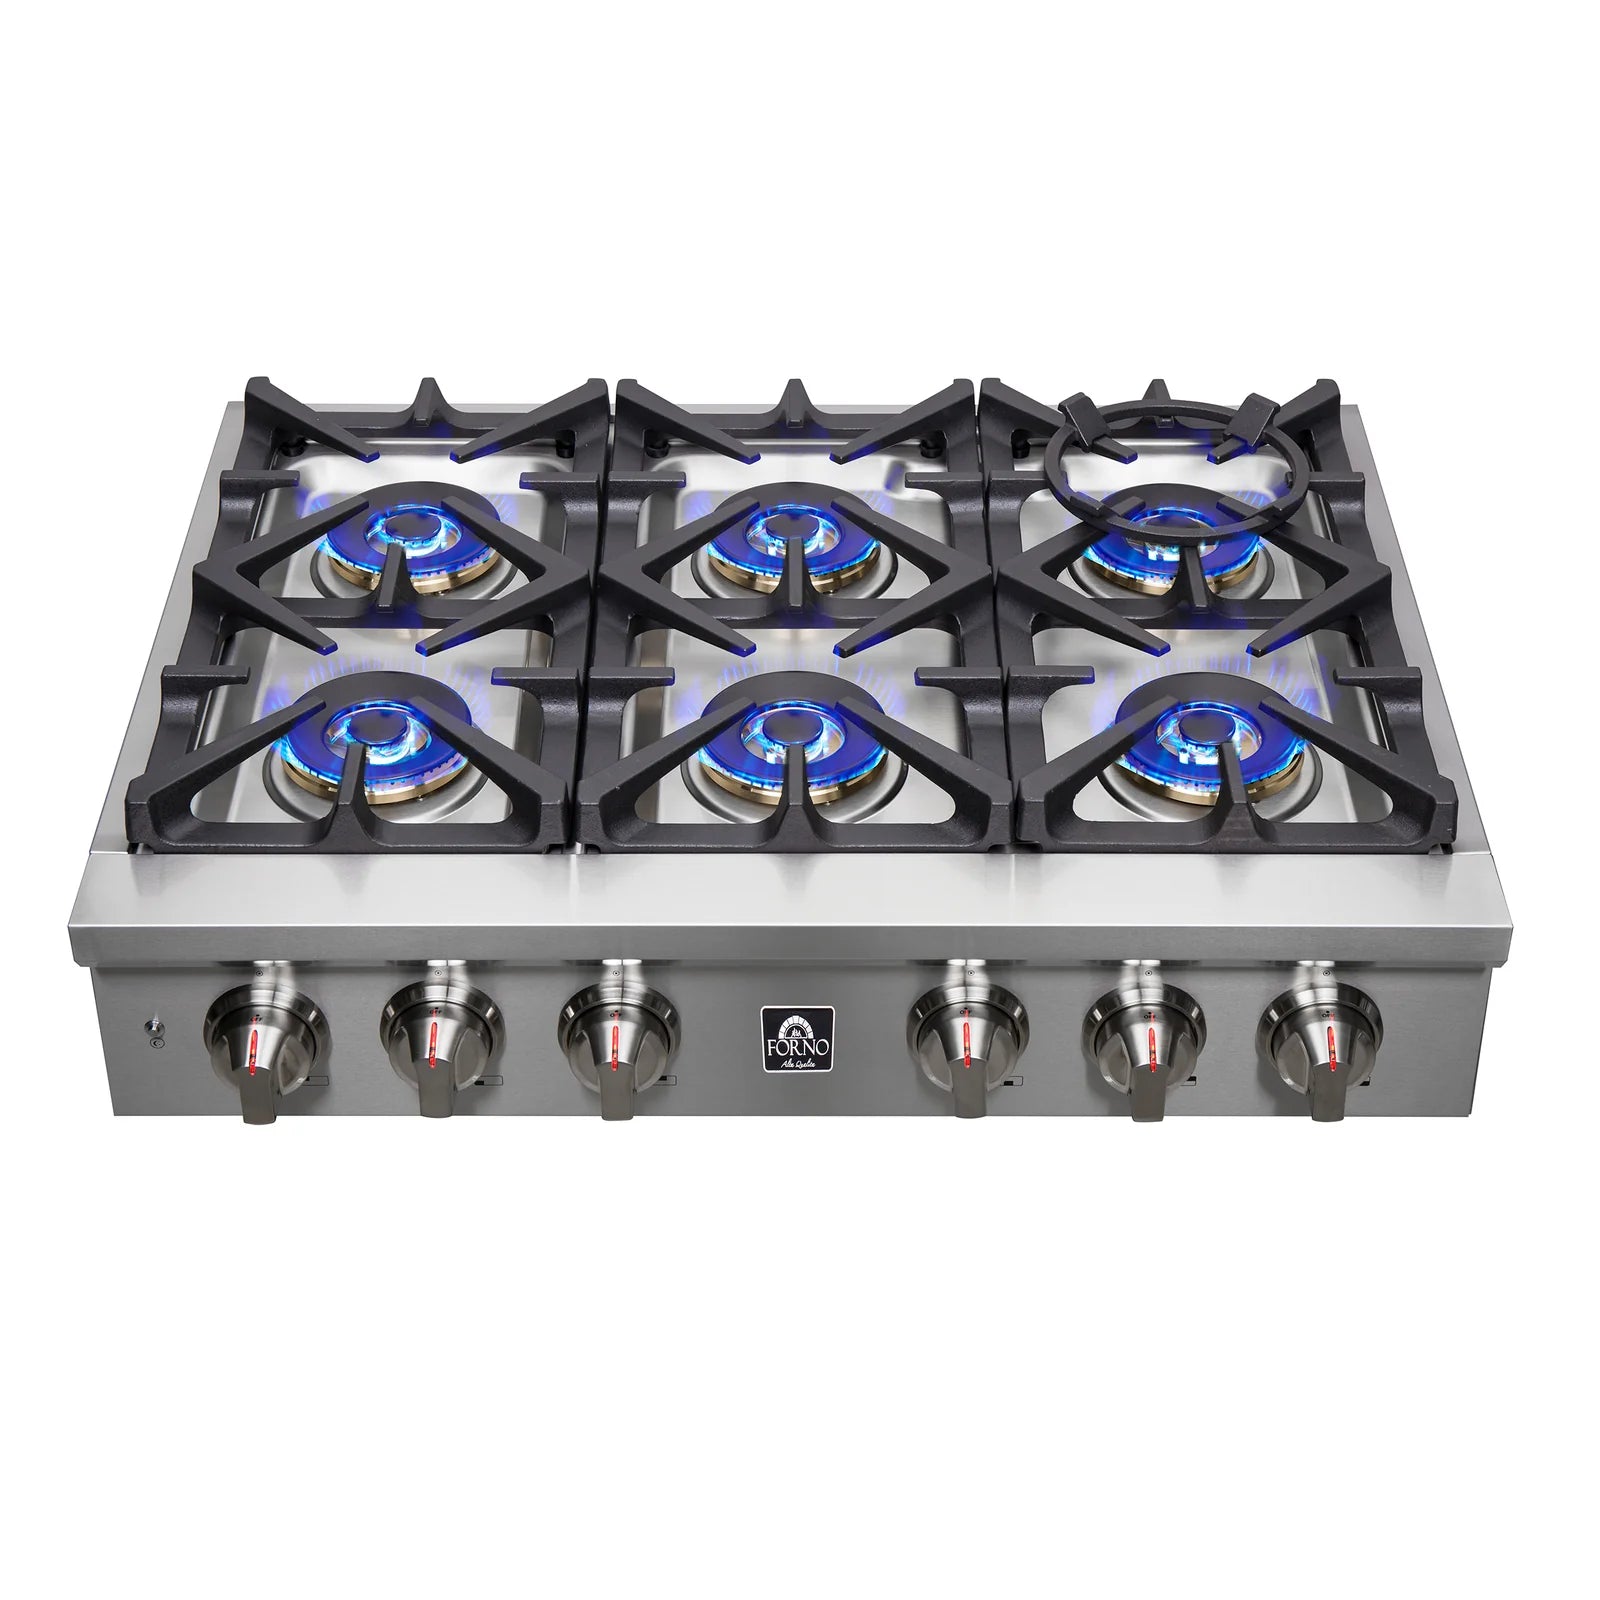 Forno Spezia 36-Inch Gas Cooktop, 6 Burners. Wok Ring and Grill/Griddle in Stainless Steel - FCTGS5751-36